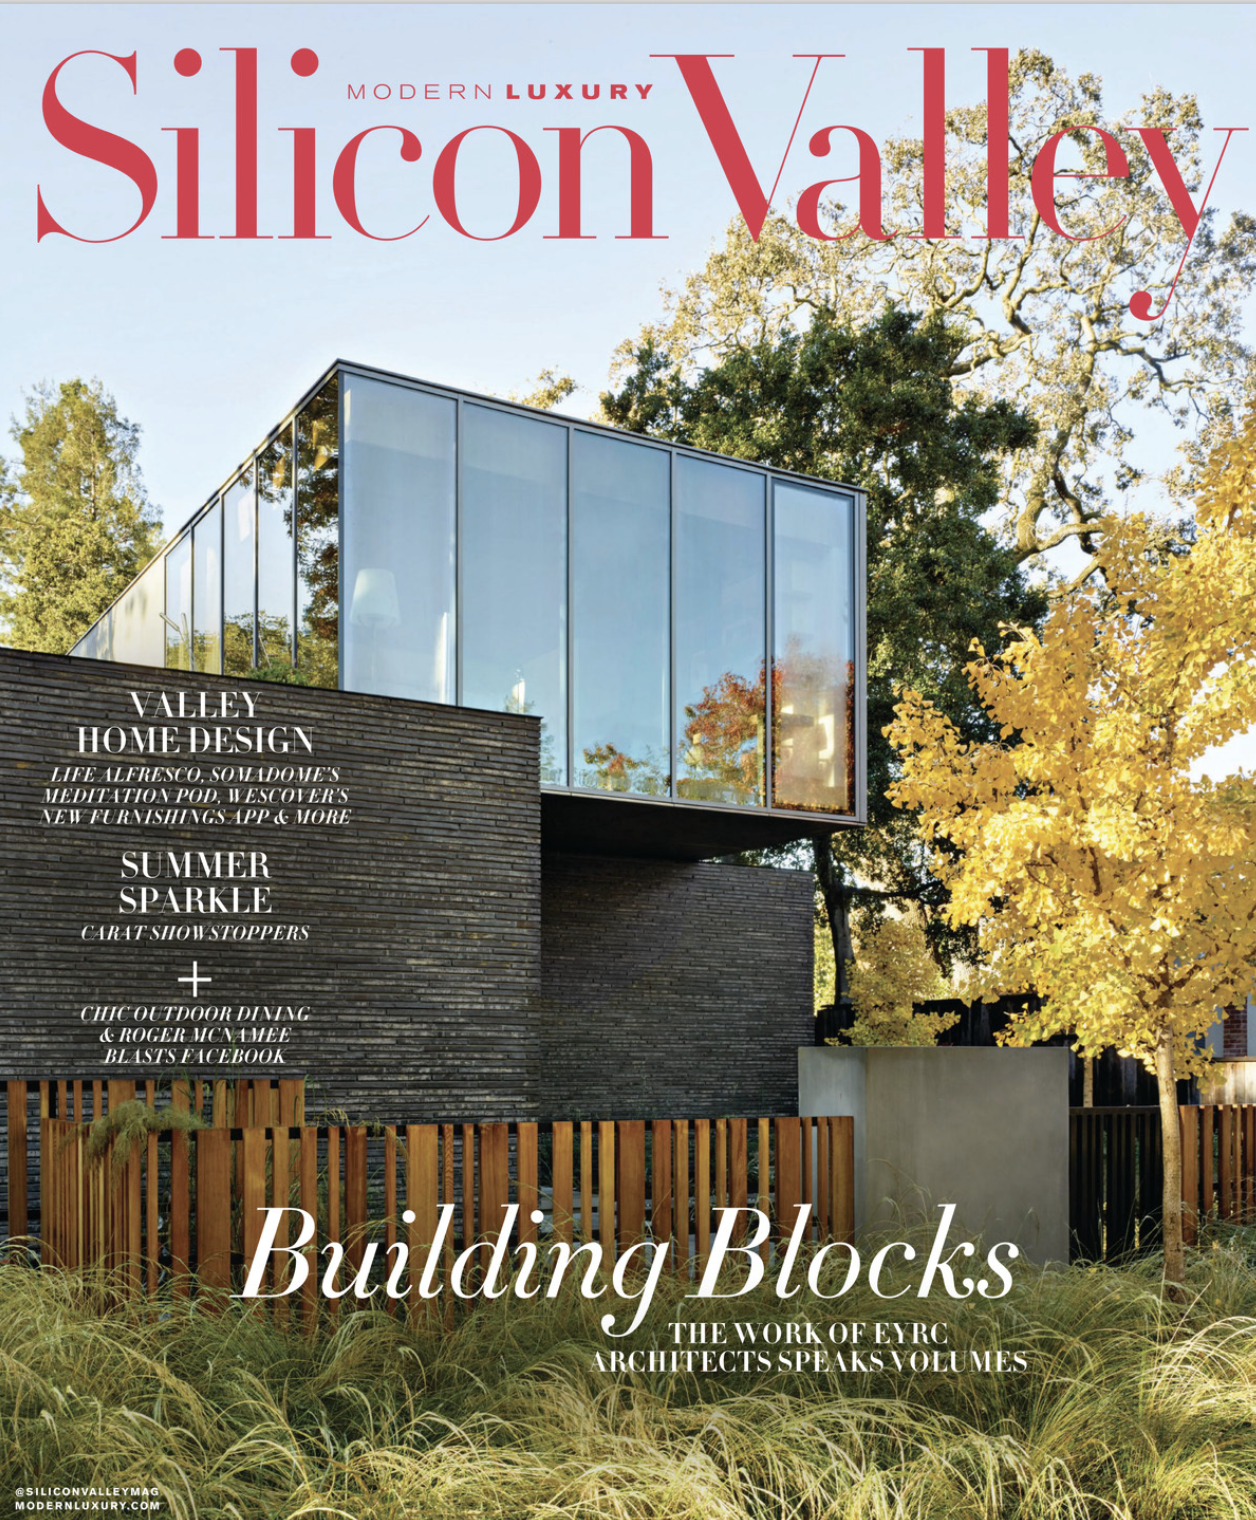 Modern Luxury Silicon Valley (Copy)